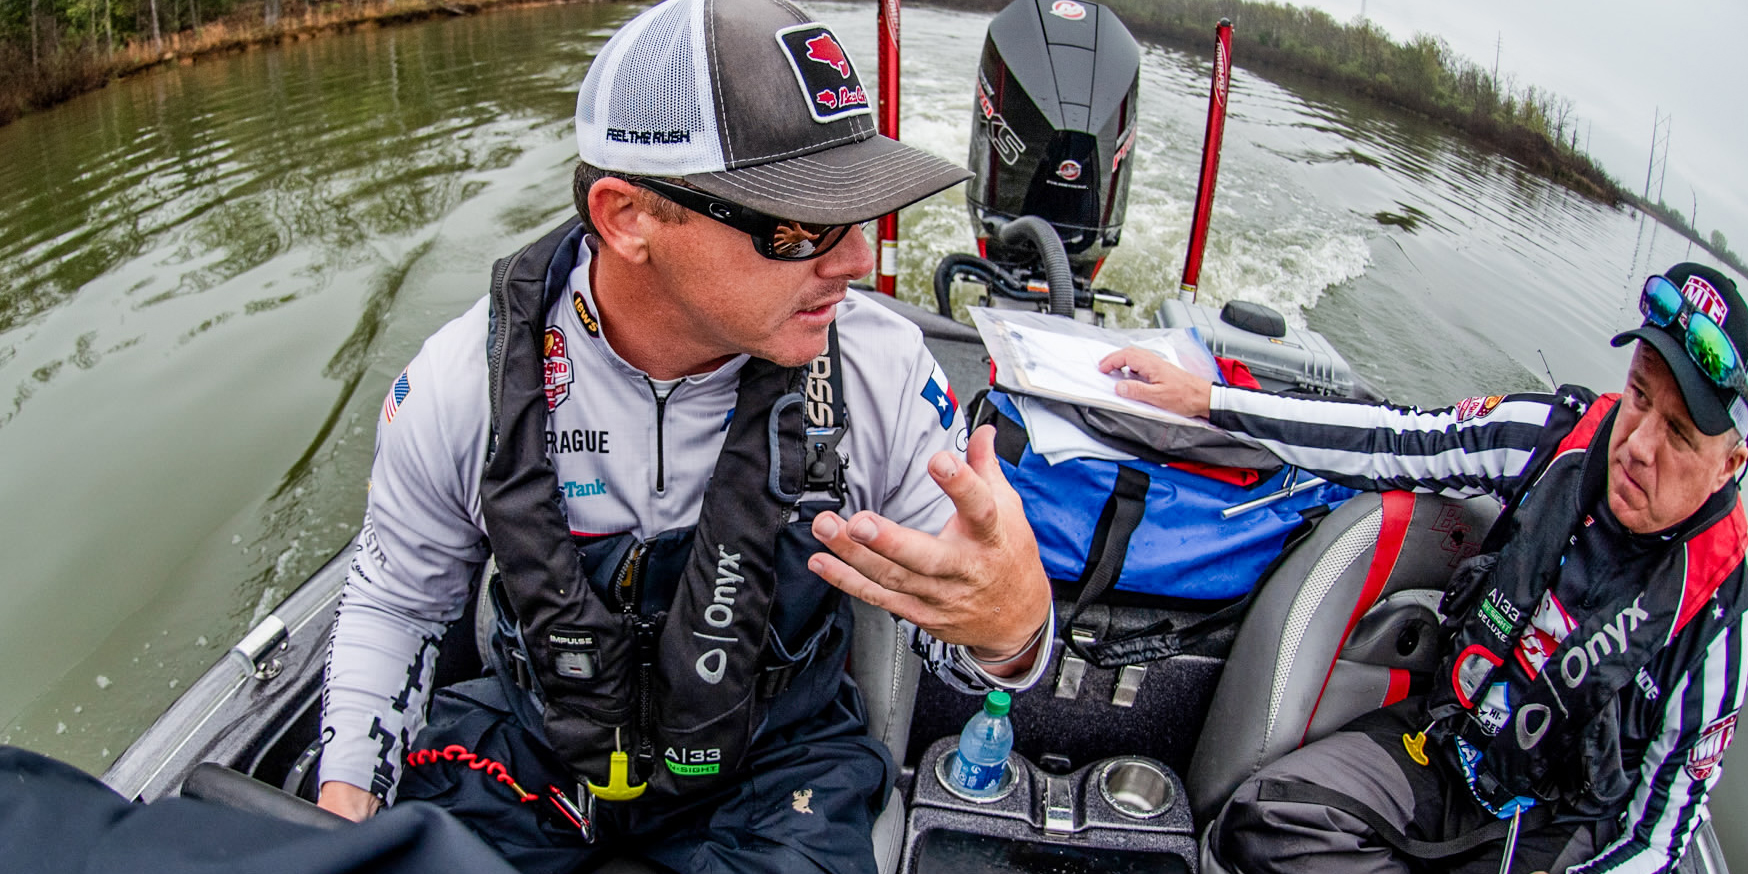 Sprague's 65 Lake Fork Largemouth Deemed a Legal Catch by Tournament